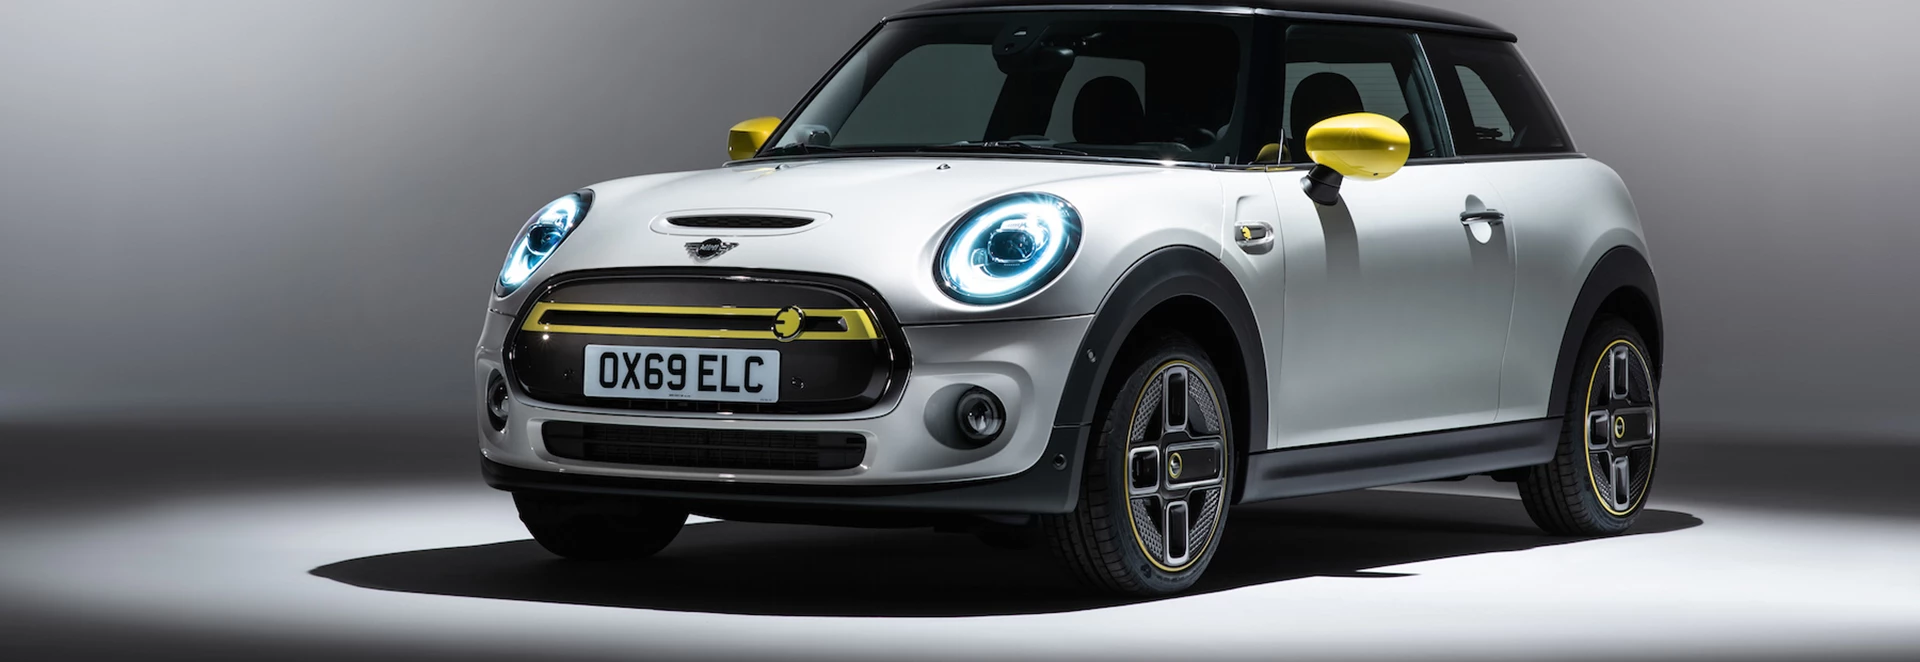 MINI Electric fully revealed - One of the lightest EVs on sale 